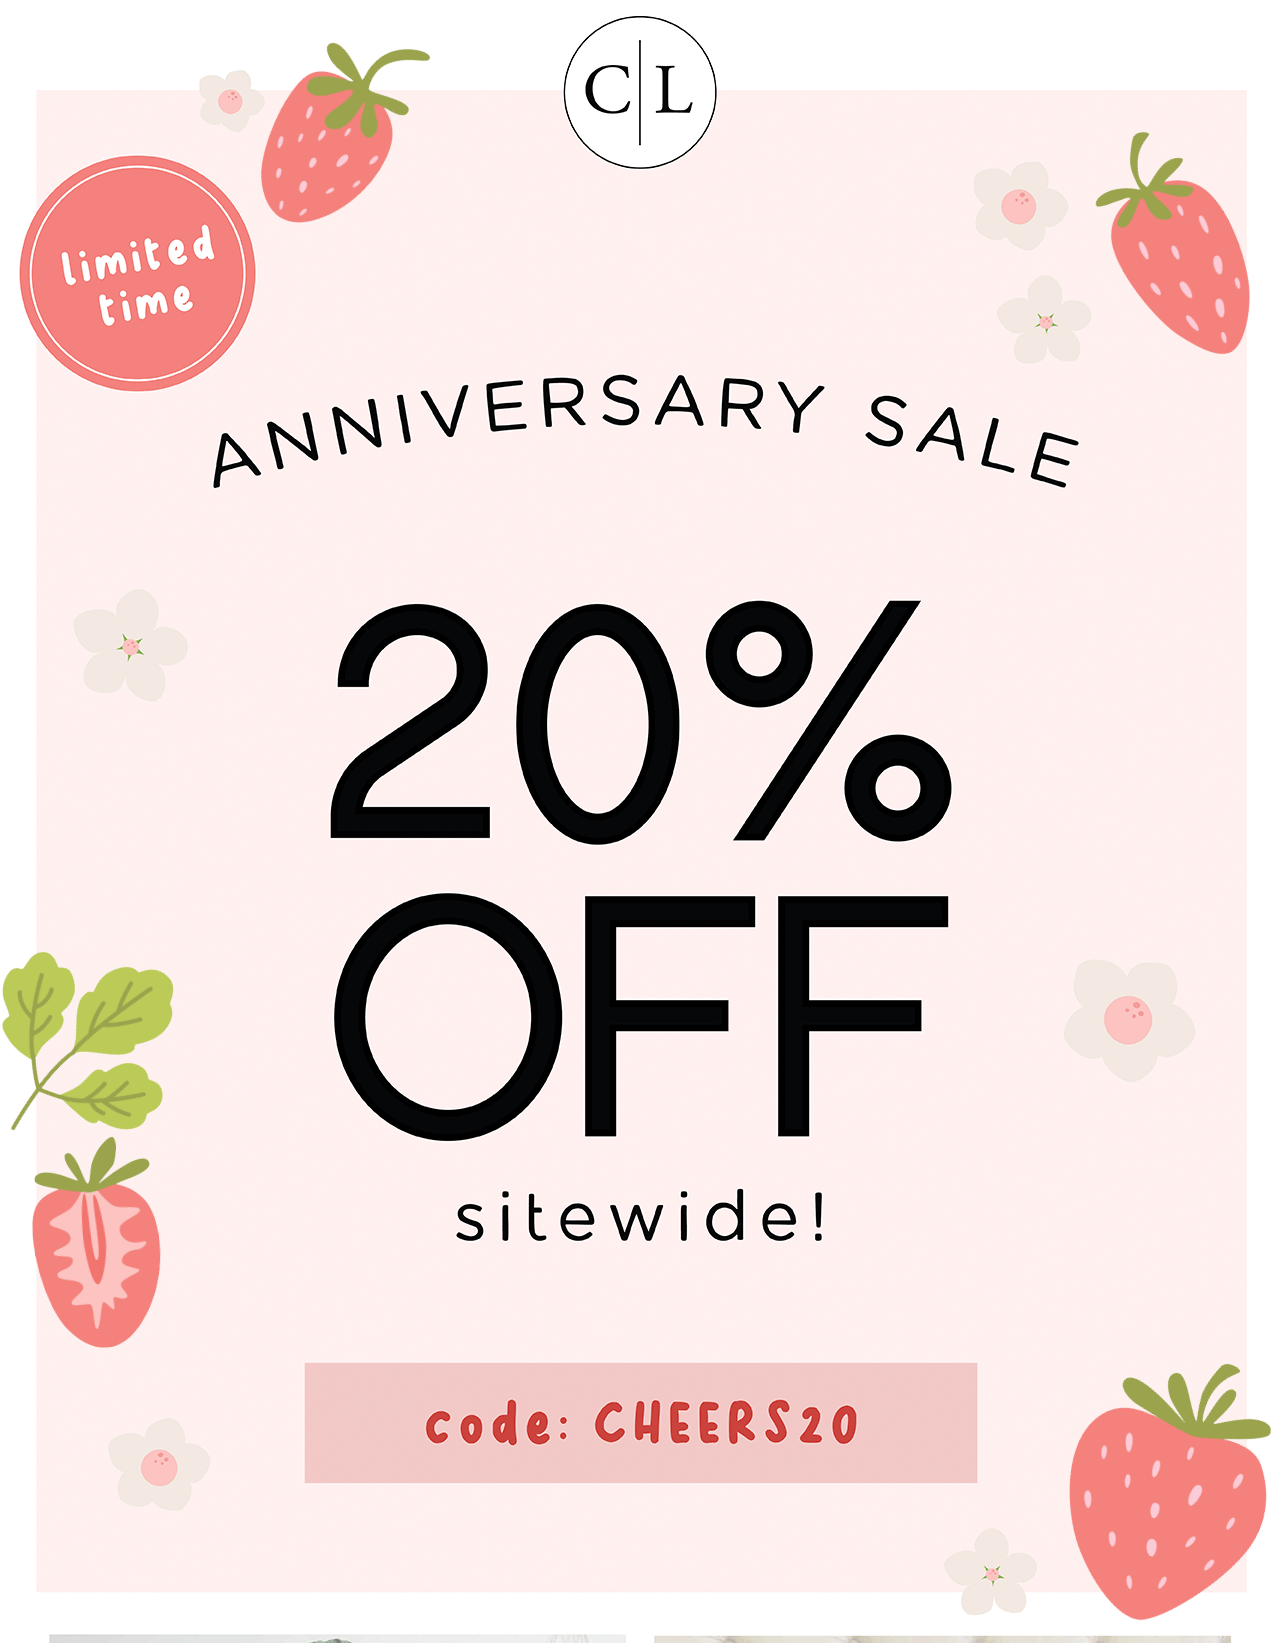 limited time Anniversary Sale | 20% OFF sitewide! | code: CHEERS20